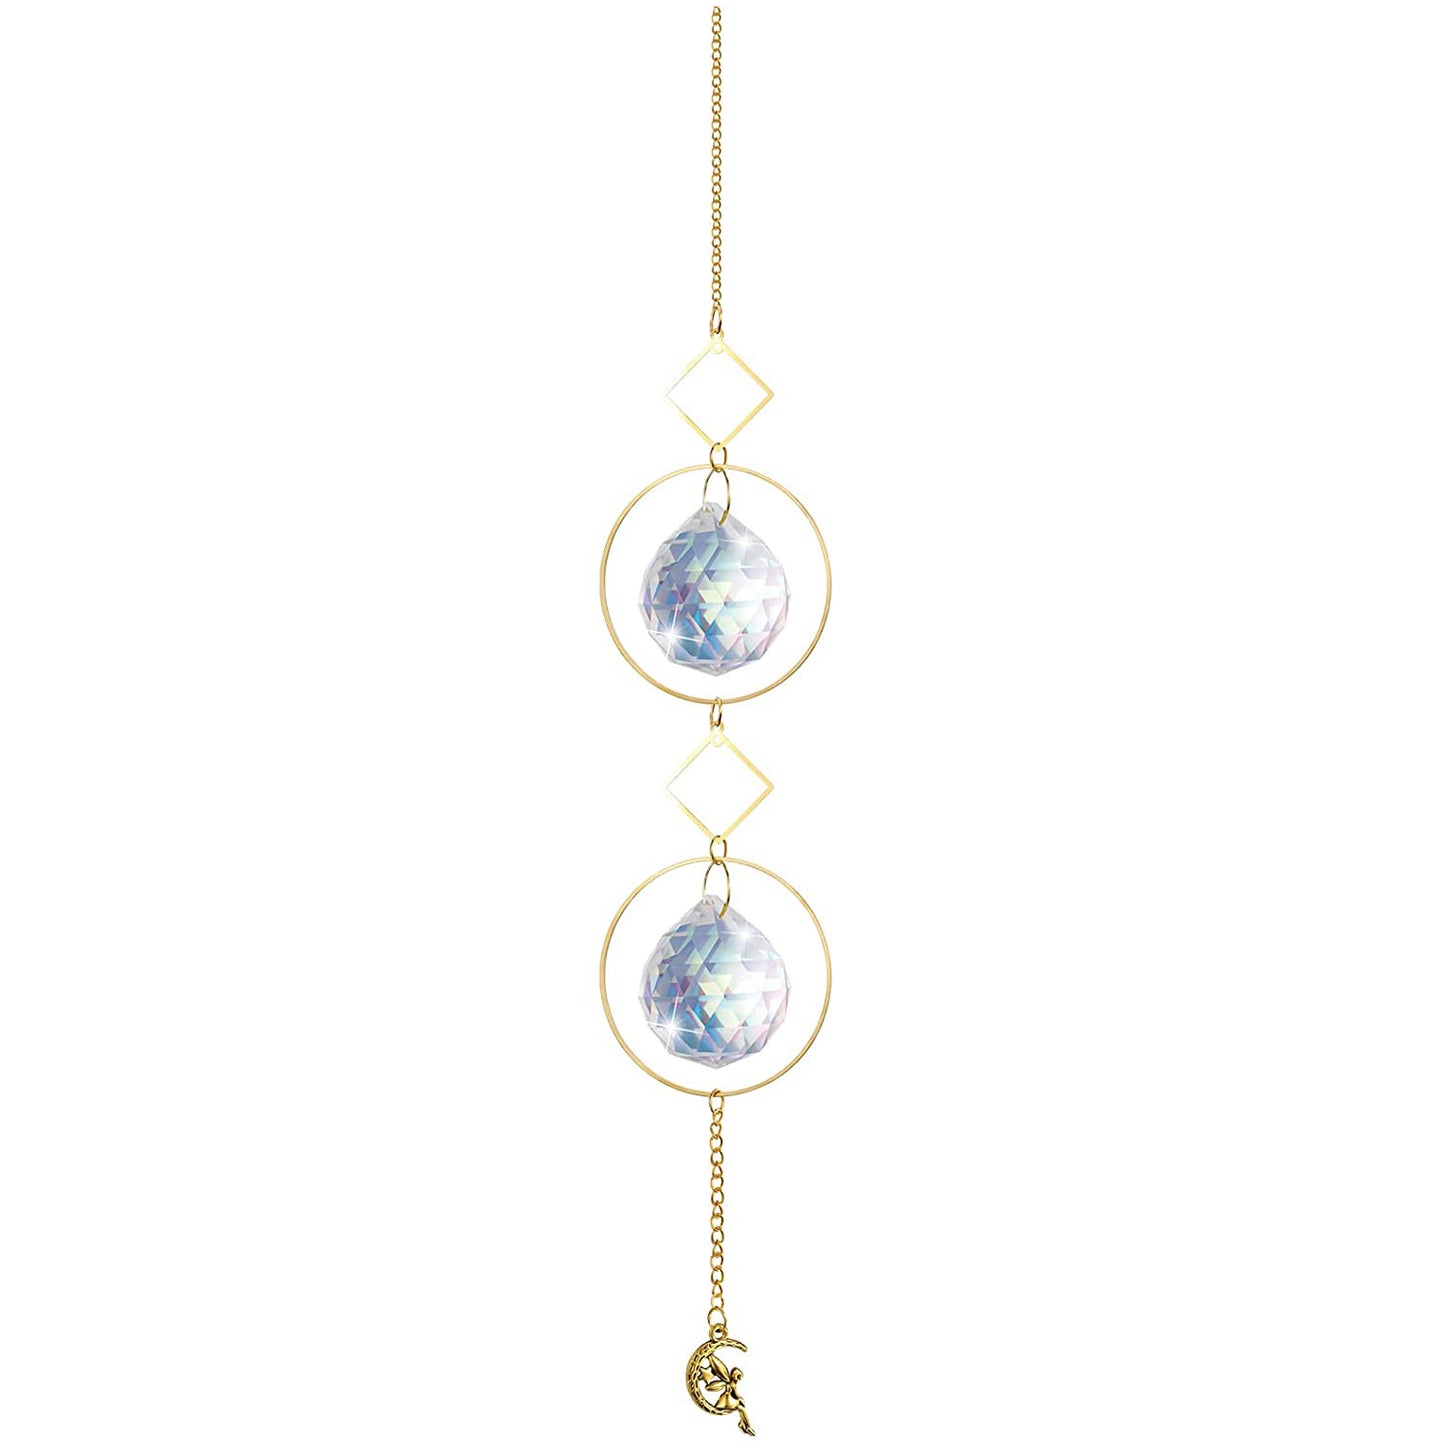 K9 Aura Crystal 2 Moons Brass Color Twinkle Hanger - Long inch - China - NEW911